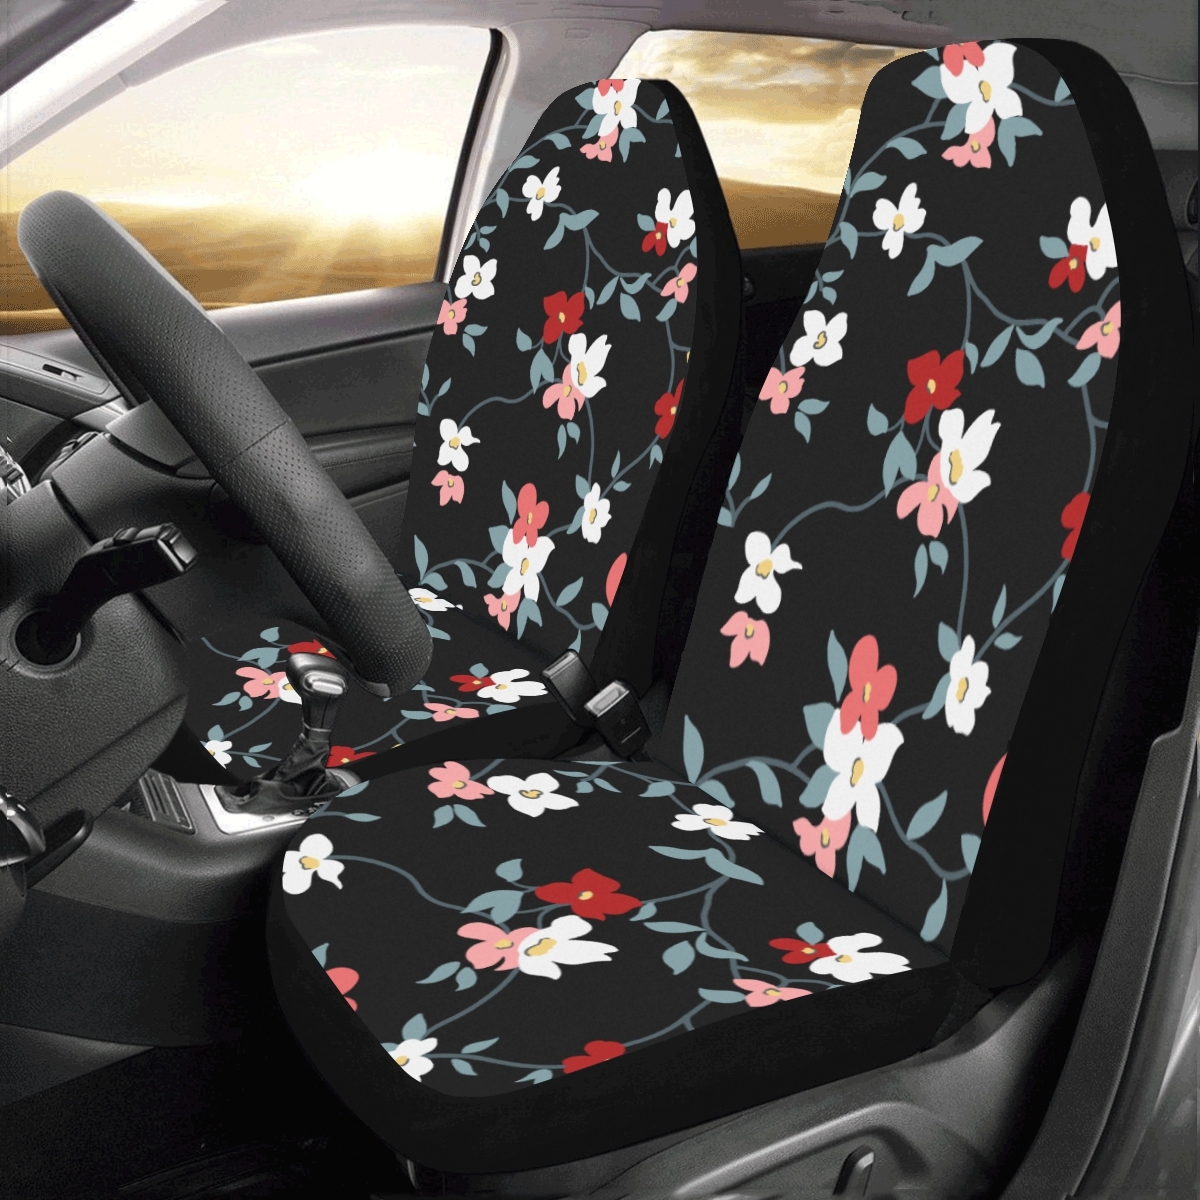 Tiny Cute And Funny Floral Universal Fit Auto Drive Car Seat Covers